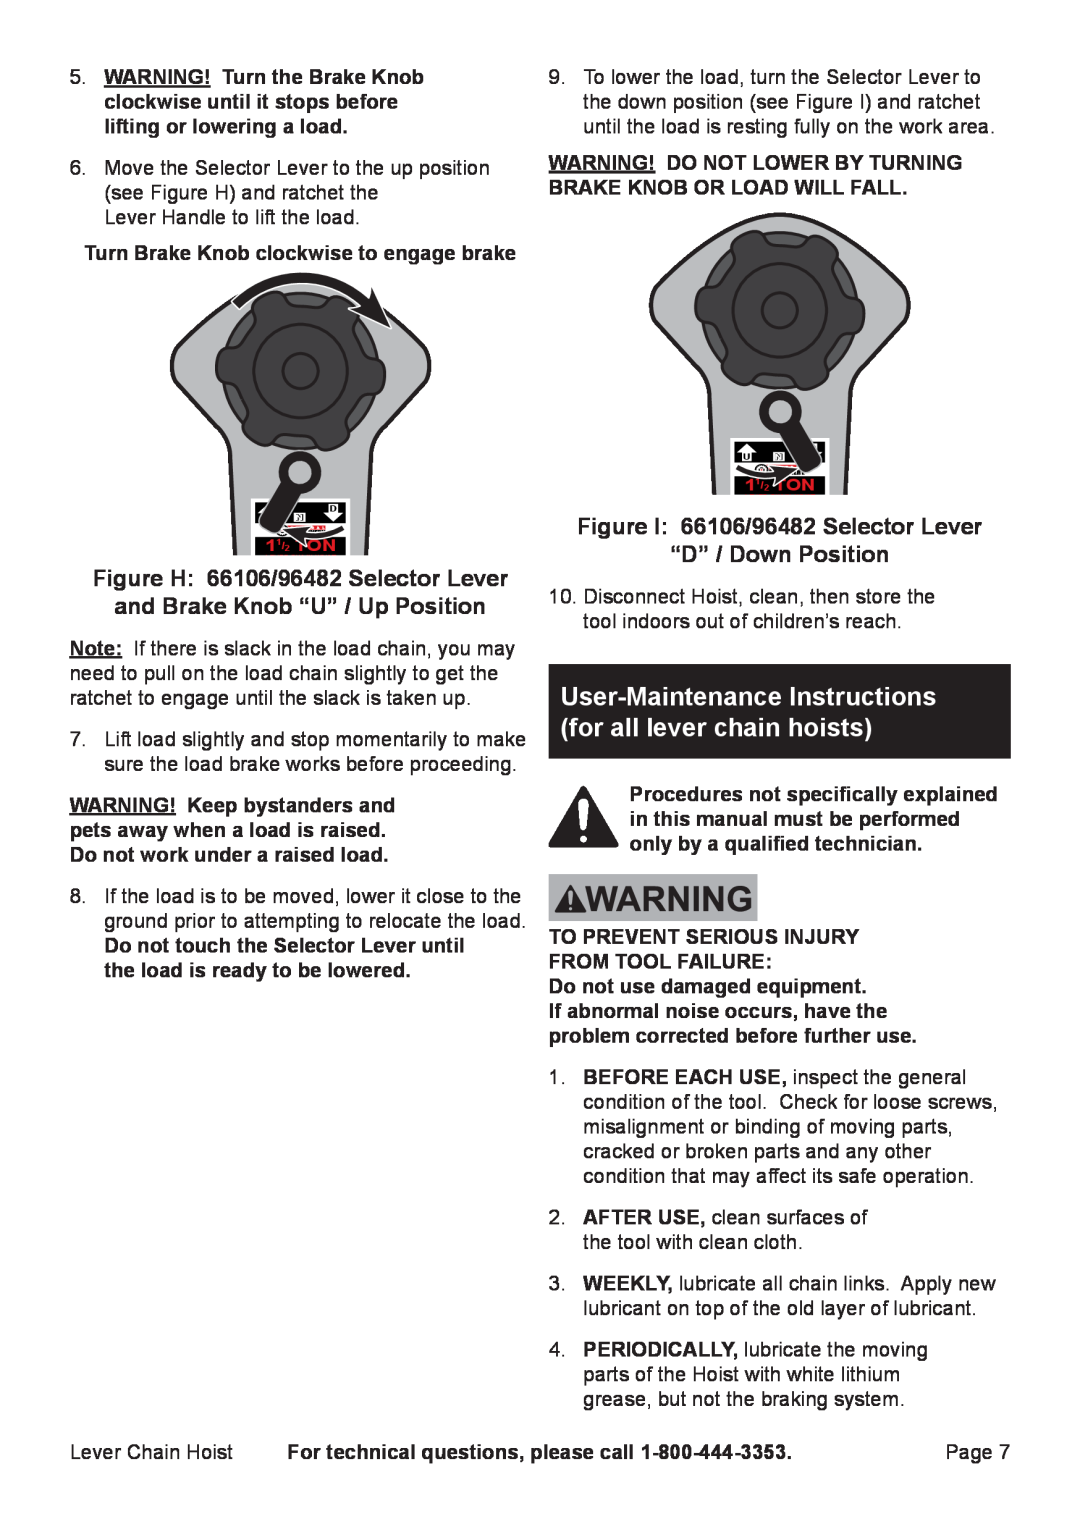 Harbor Freight Tools User-Maintenance Instructions, for all lever chain hoists, Figure H 66106/96482 Selector Lever 